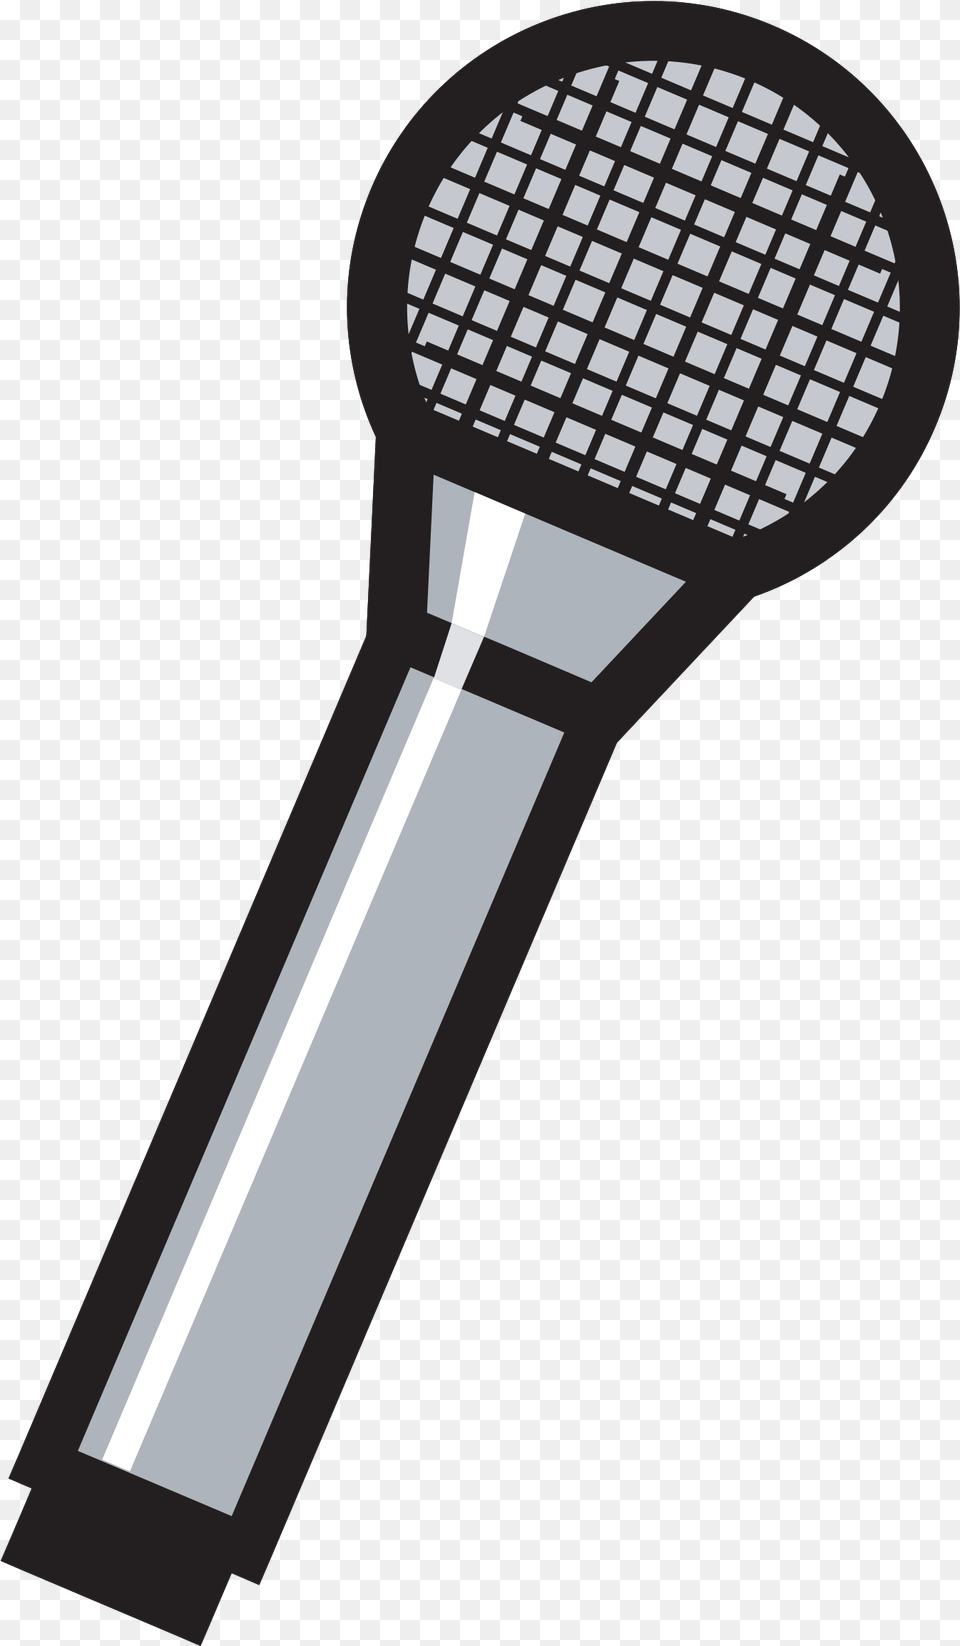 Microphone Cartoon With Transparent Background Microphone, Electrical Device, Cross, Symbol Png Image